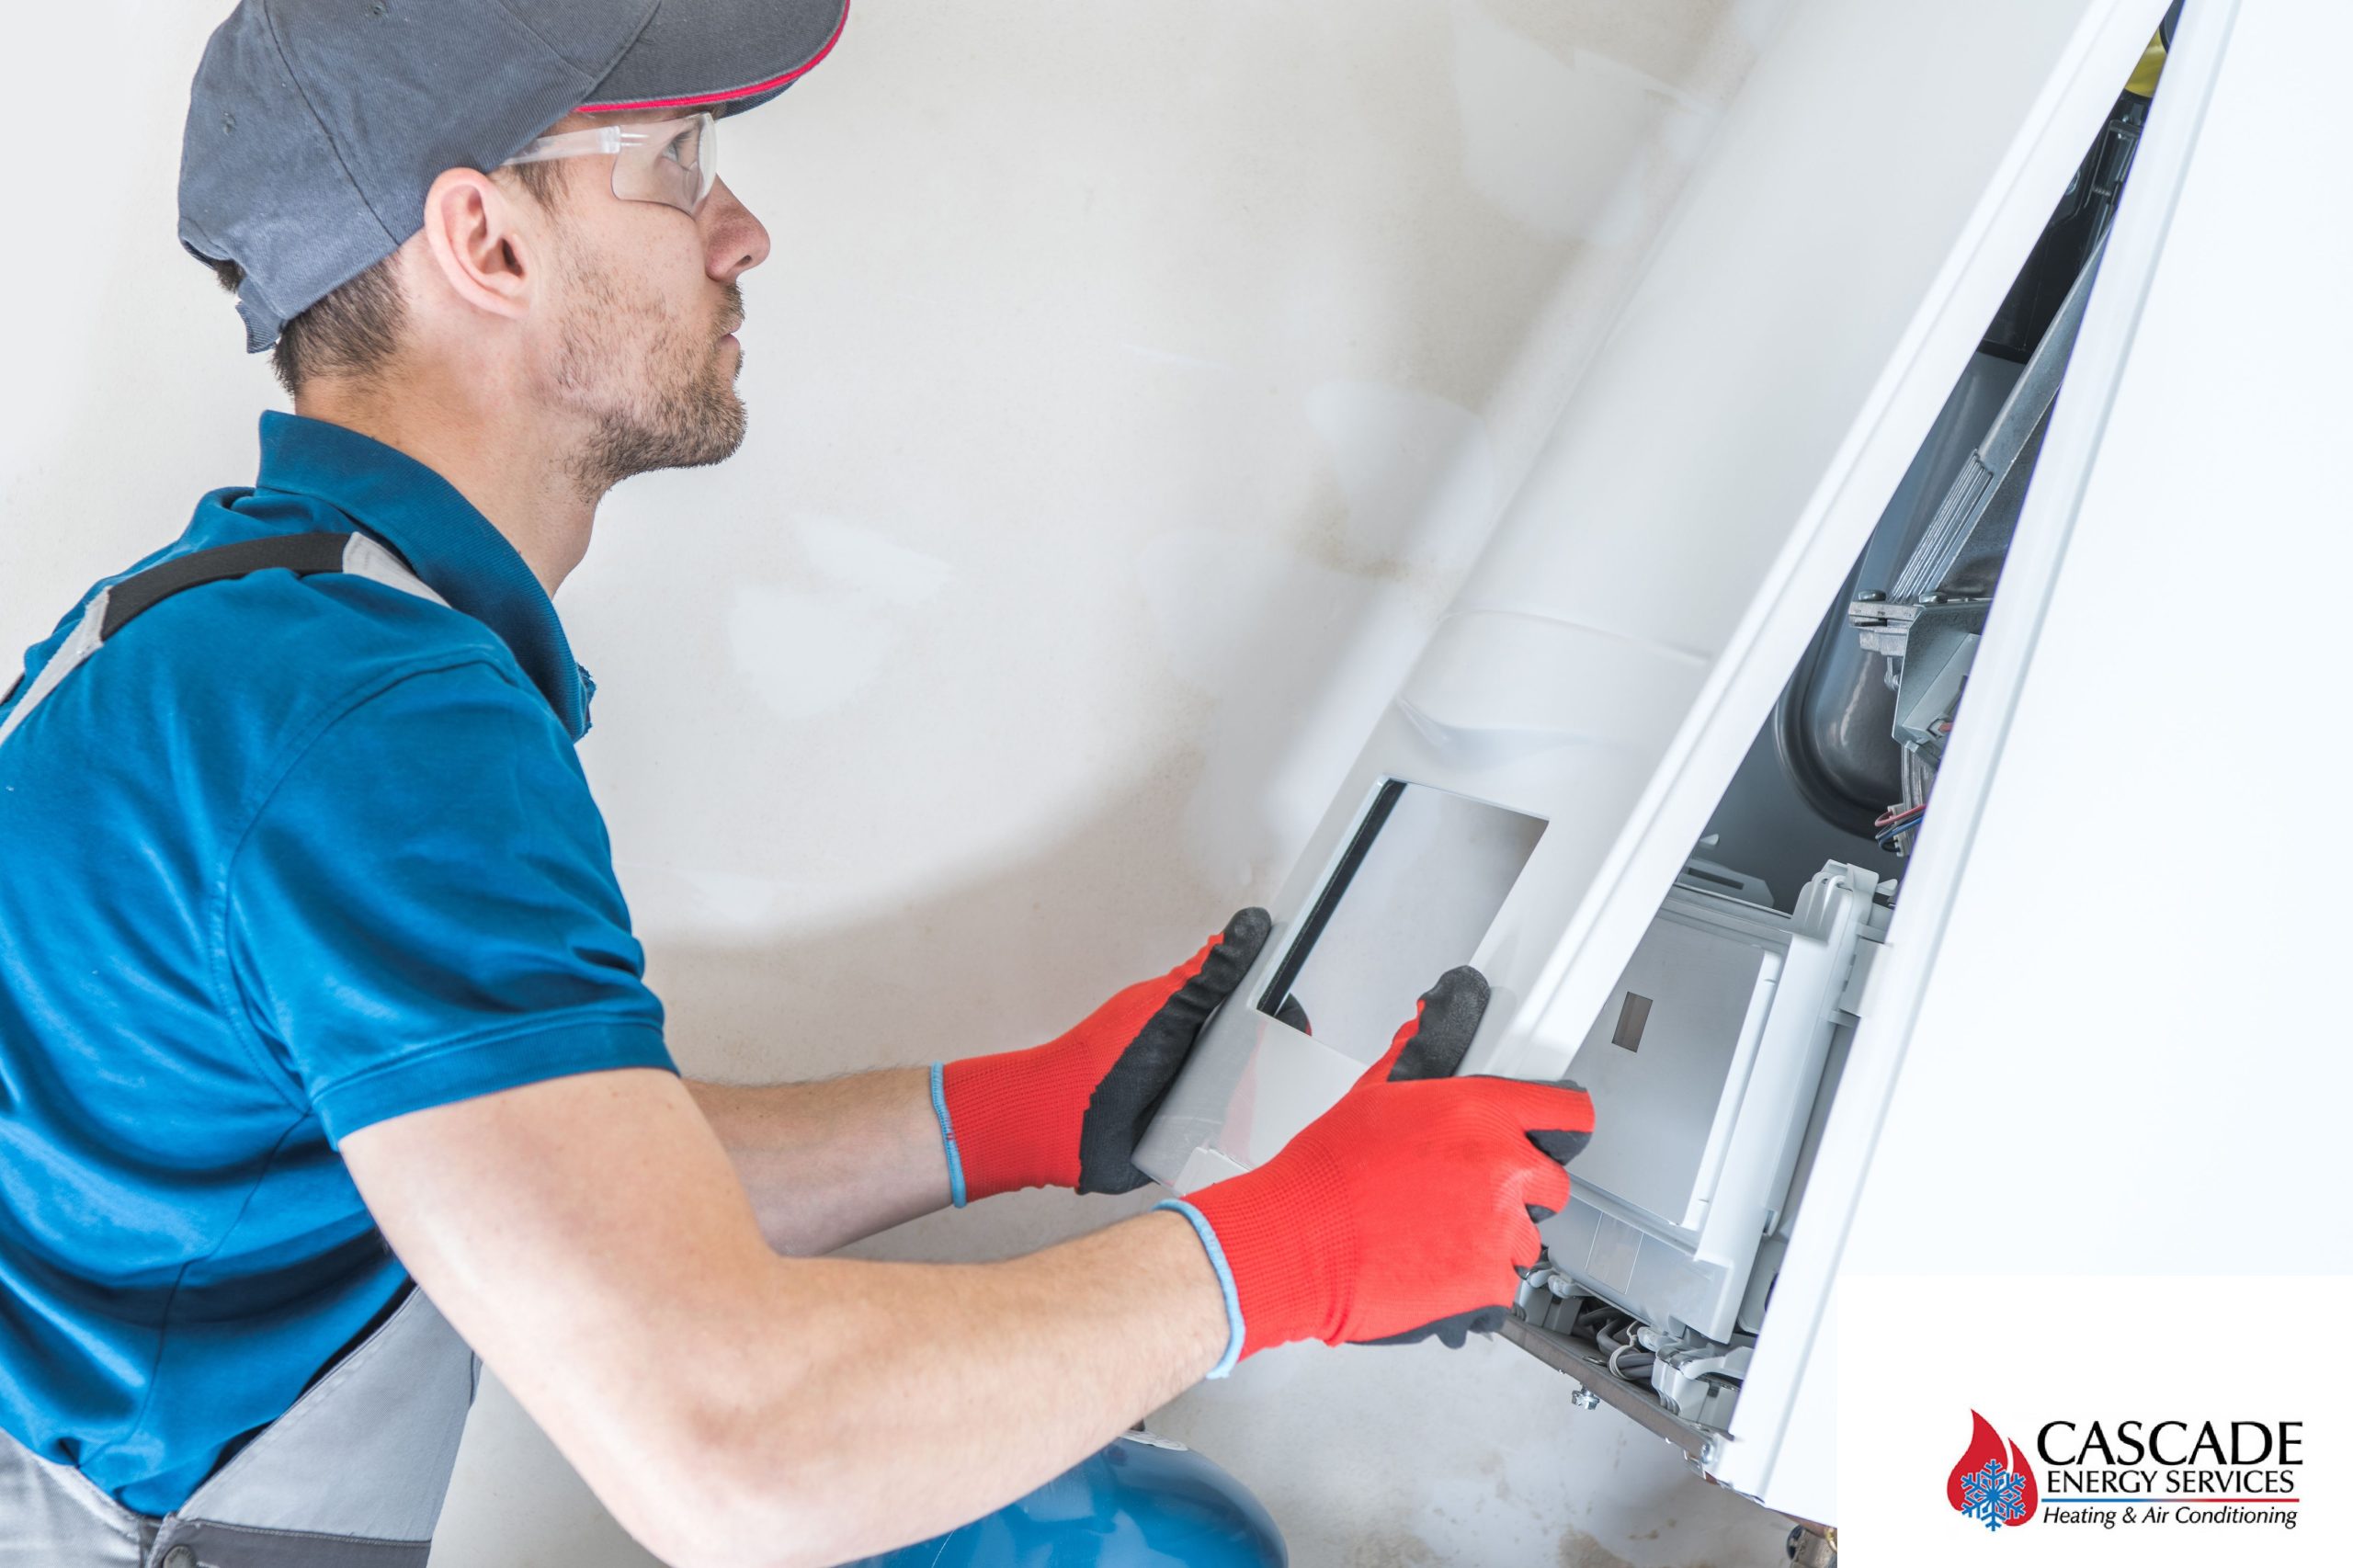 Furnace Installation - What You Need to Know Before Buying a New Furnace